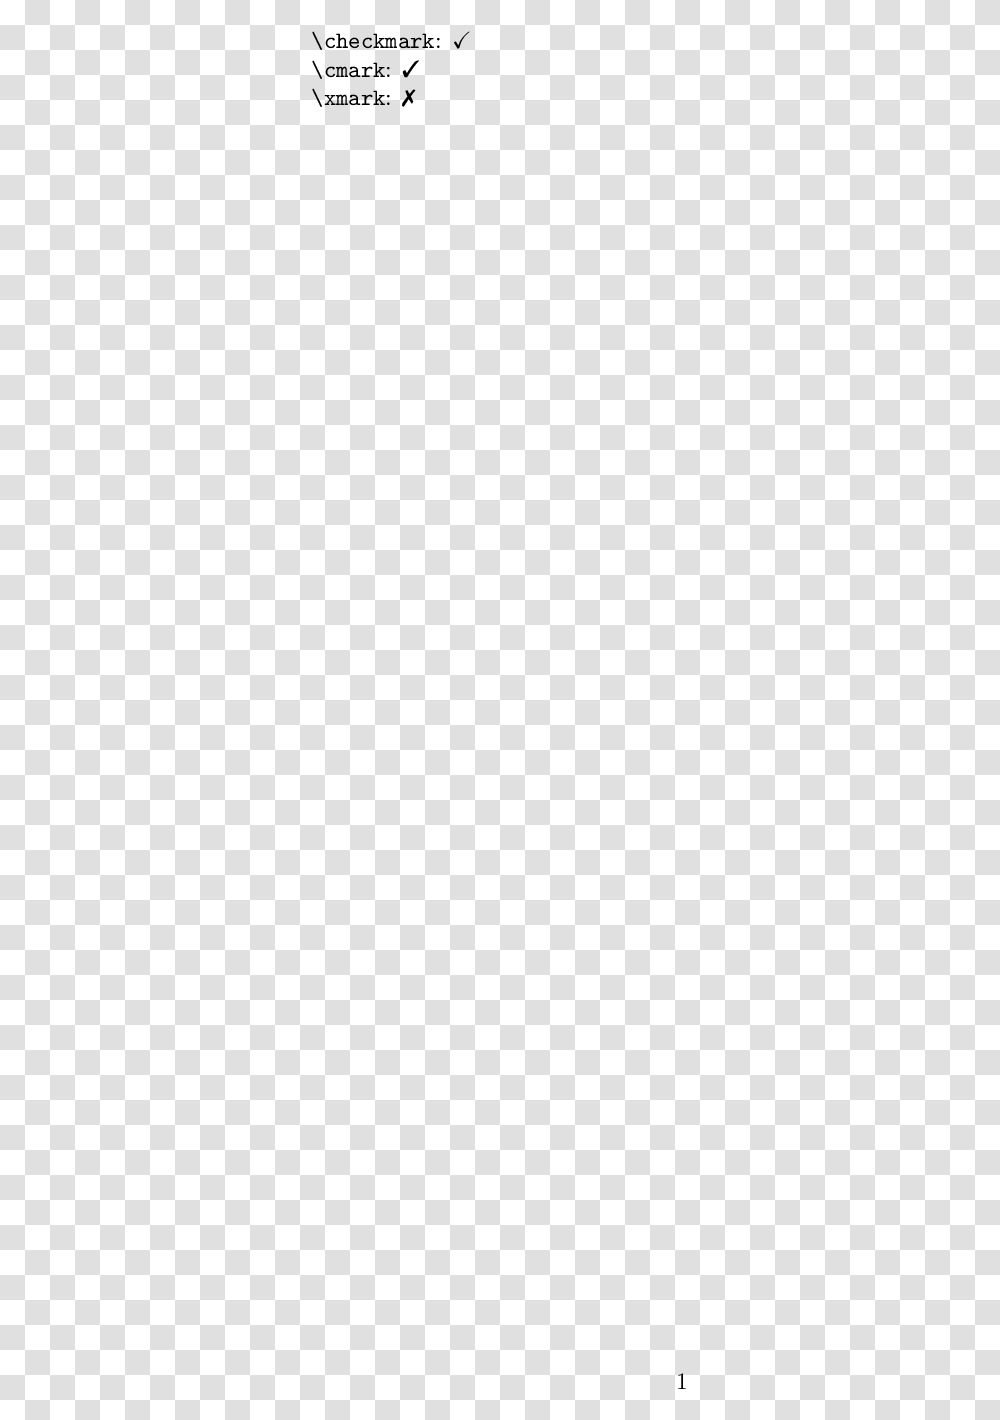 Parallel, White, Texture, White Board Transparent Png